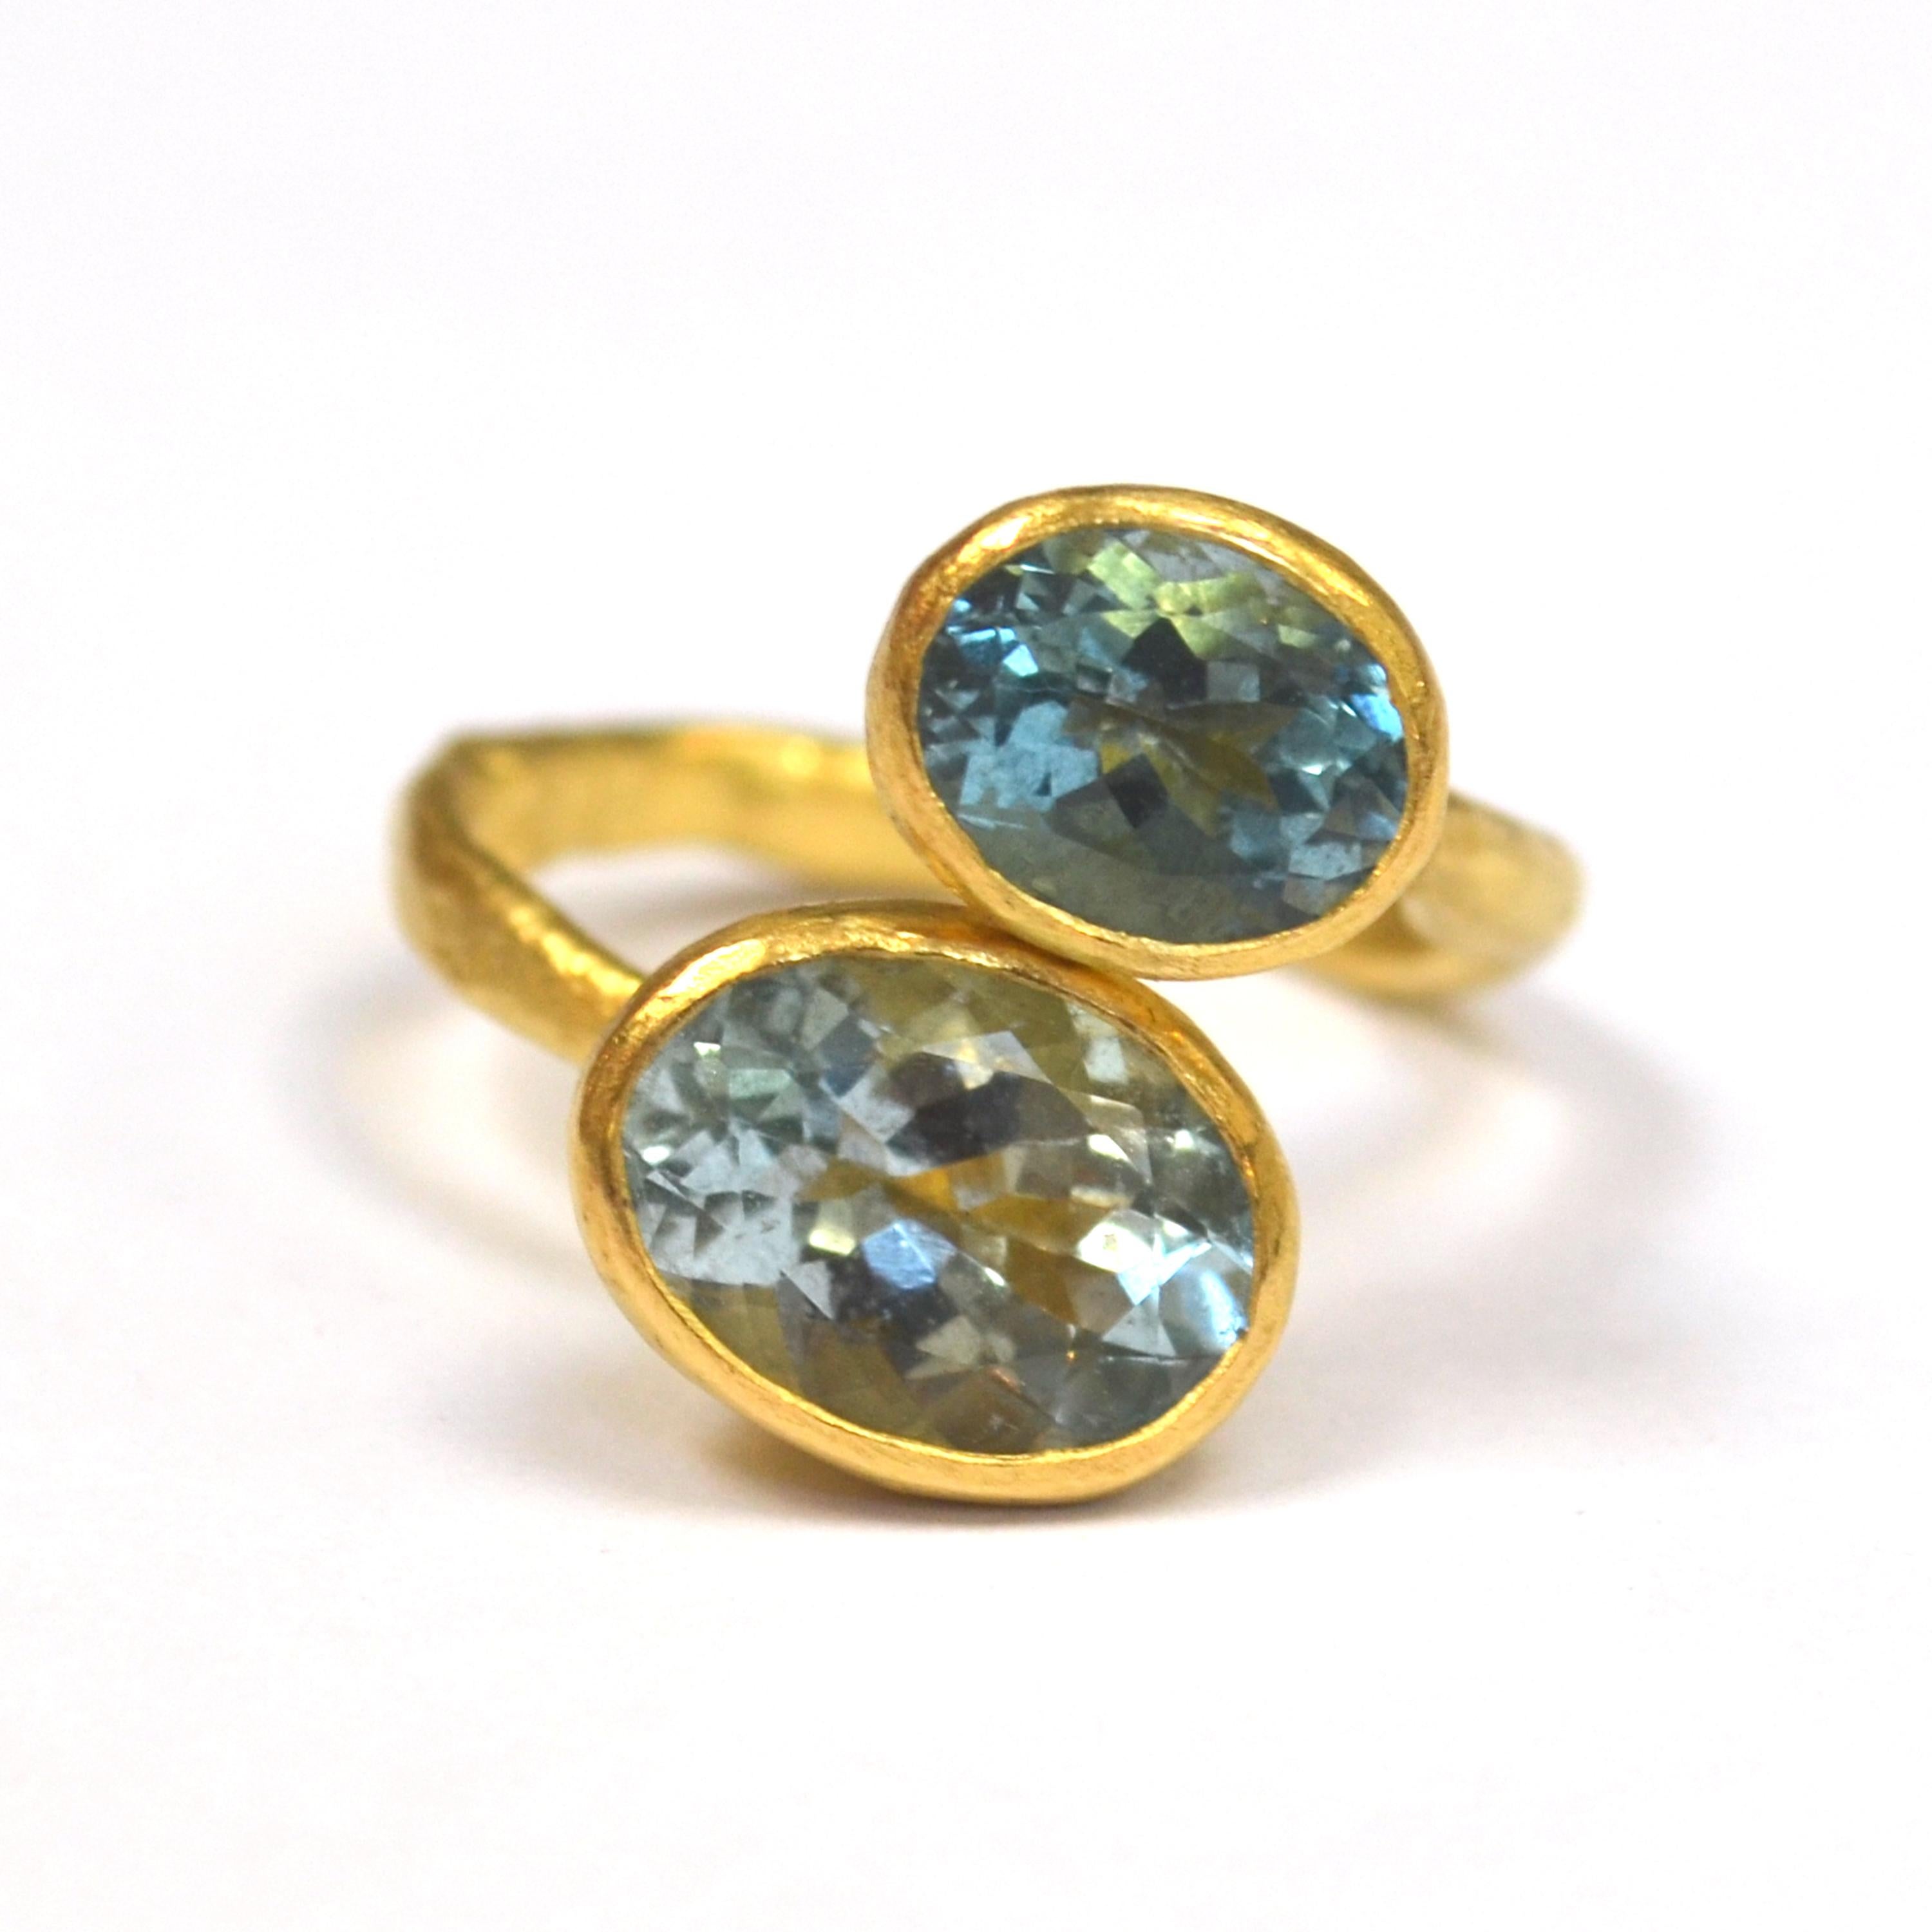 18k Gold organic textured handmade open ring. With two oval Aquamarines, 4 carats and 2 carats each. Each one has a slightly different tone of blue, one is bright and watery, the other a slightly darker blue, both with beautiful facets that create